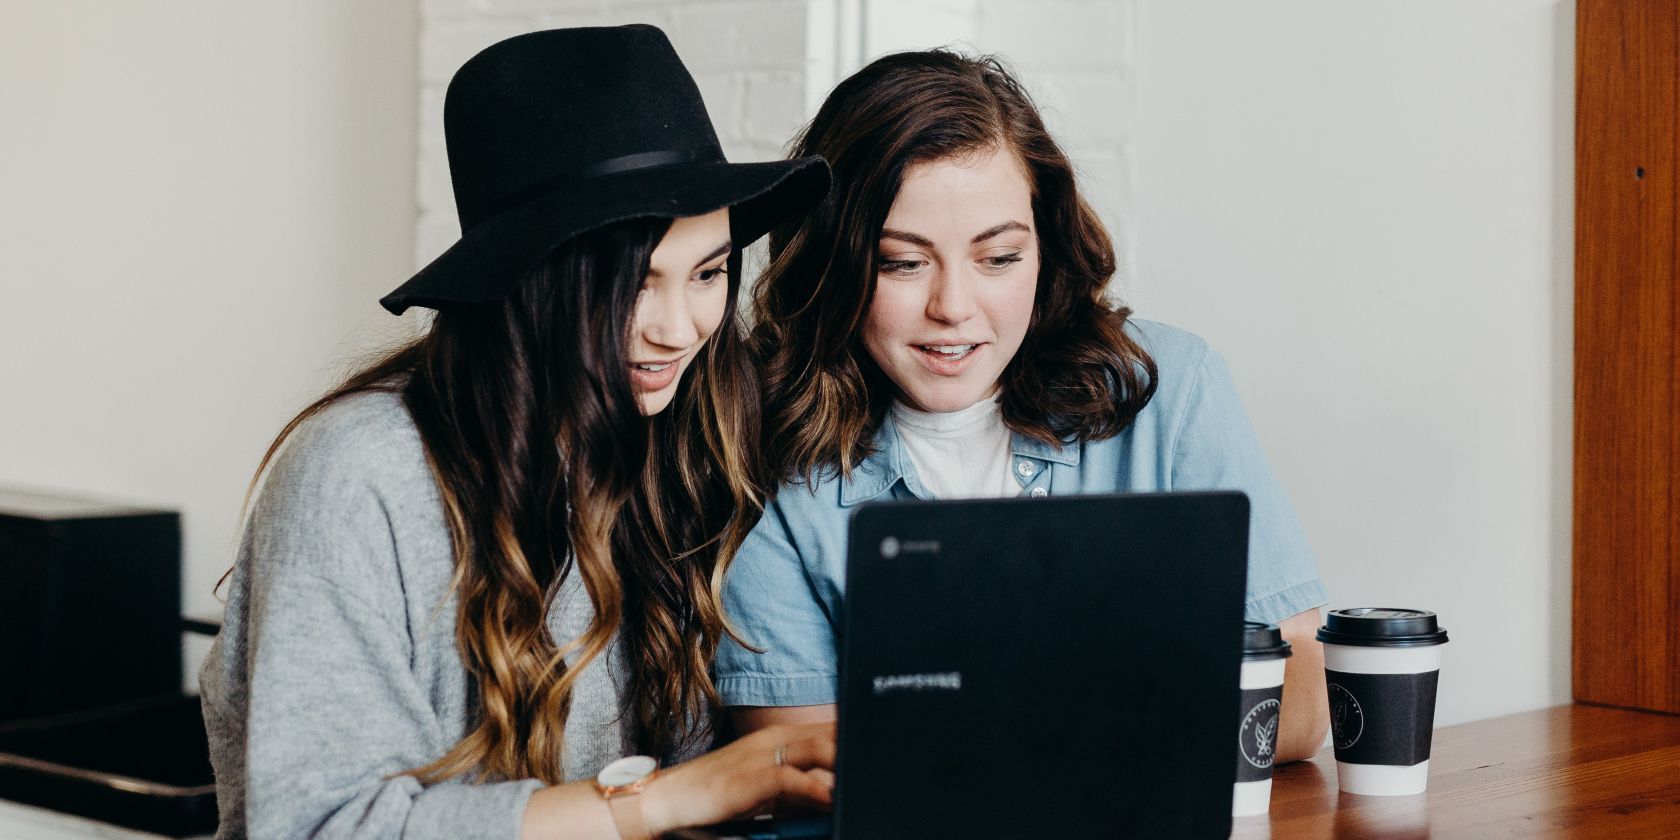 photo of two women sitting next to a computer on a desk